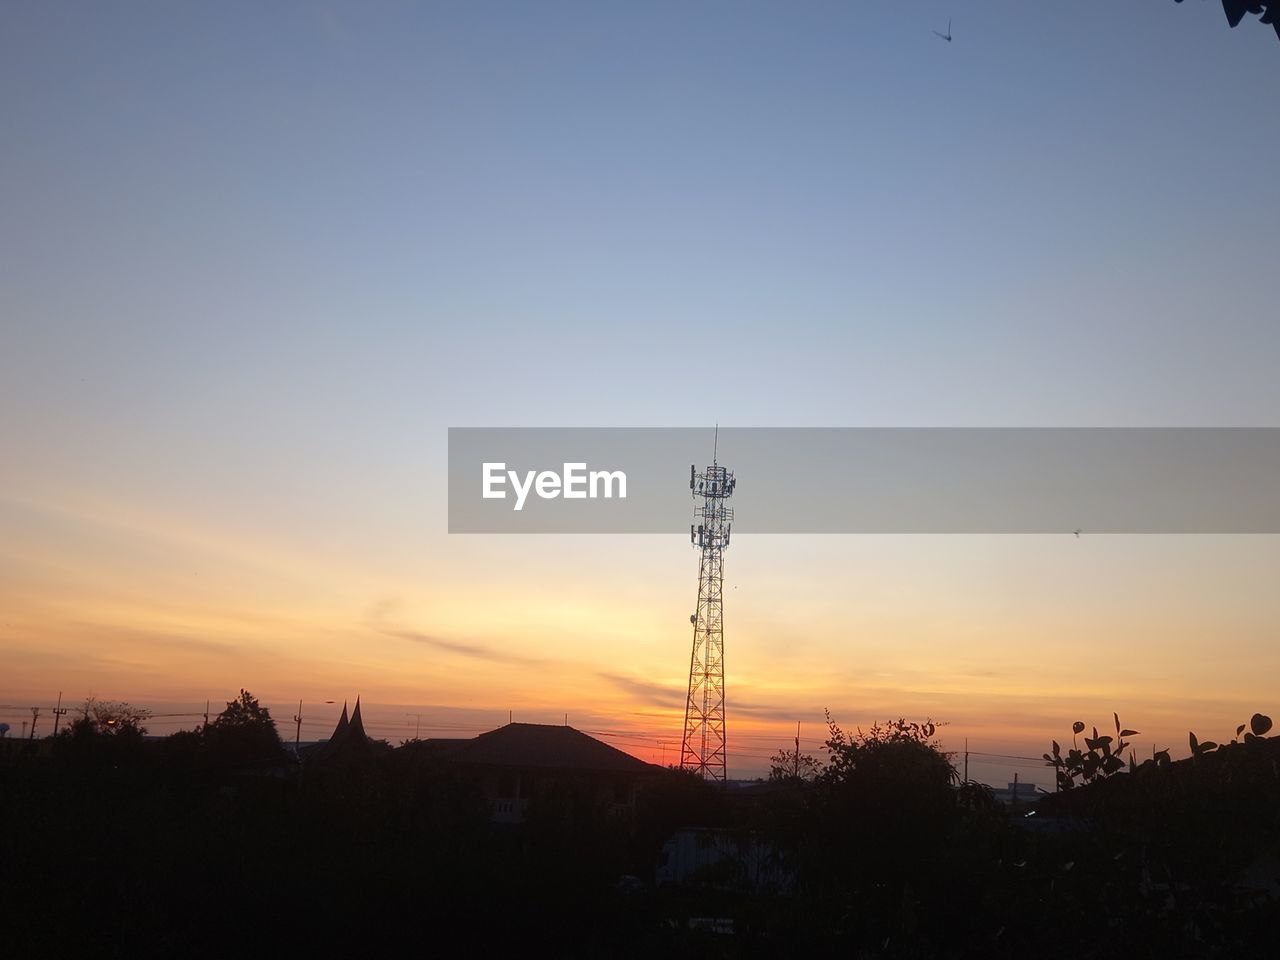 sky, sunset, silhouette, horizon, afterglow, technology, communications tower, architecture, dawn, nature, evening, built structure, tower, scenics - nature, sun, landscape, beauty in nature, environment, no people, tree, orange color, sunlight, cloud, communication, broadcasting, outdoors, copy space, city, tranquility, travel destinations, electricity, plant, building exterior, tranquil scene, building, land, business finance and industry, global communications, idyllic